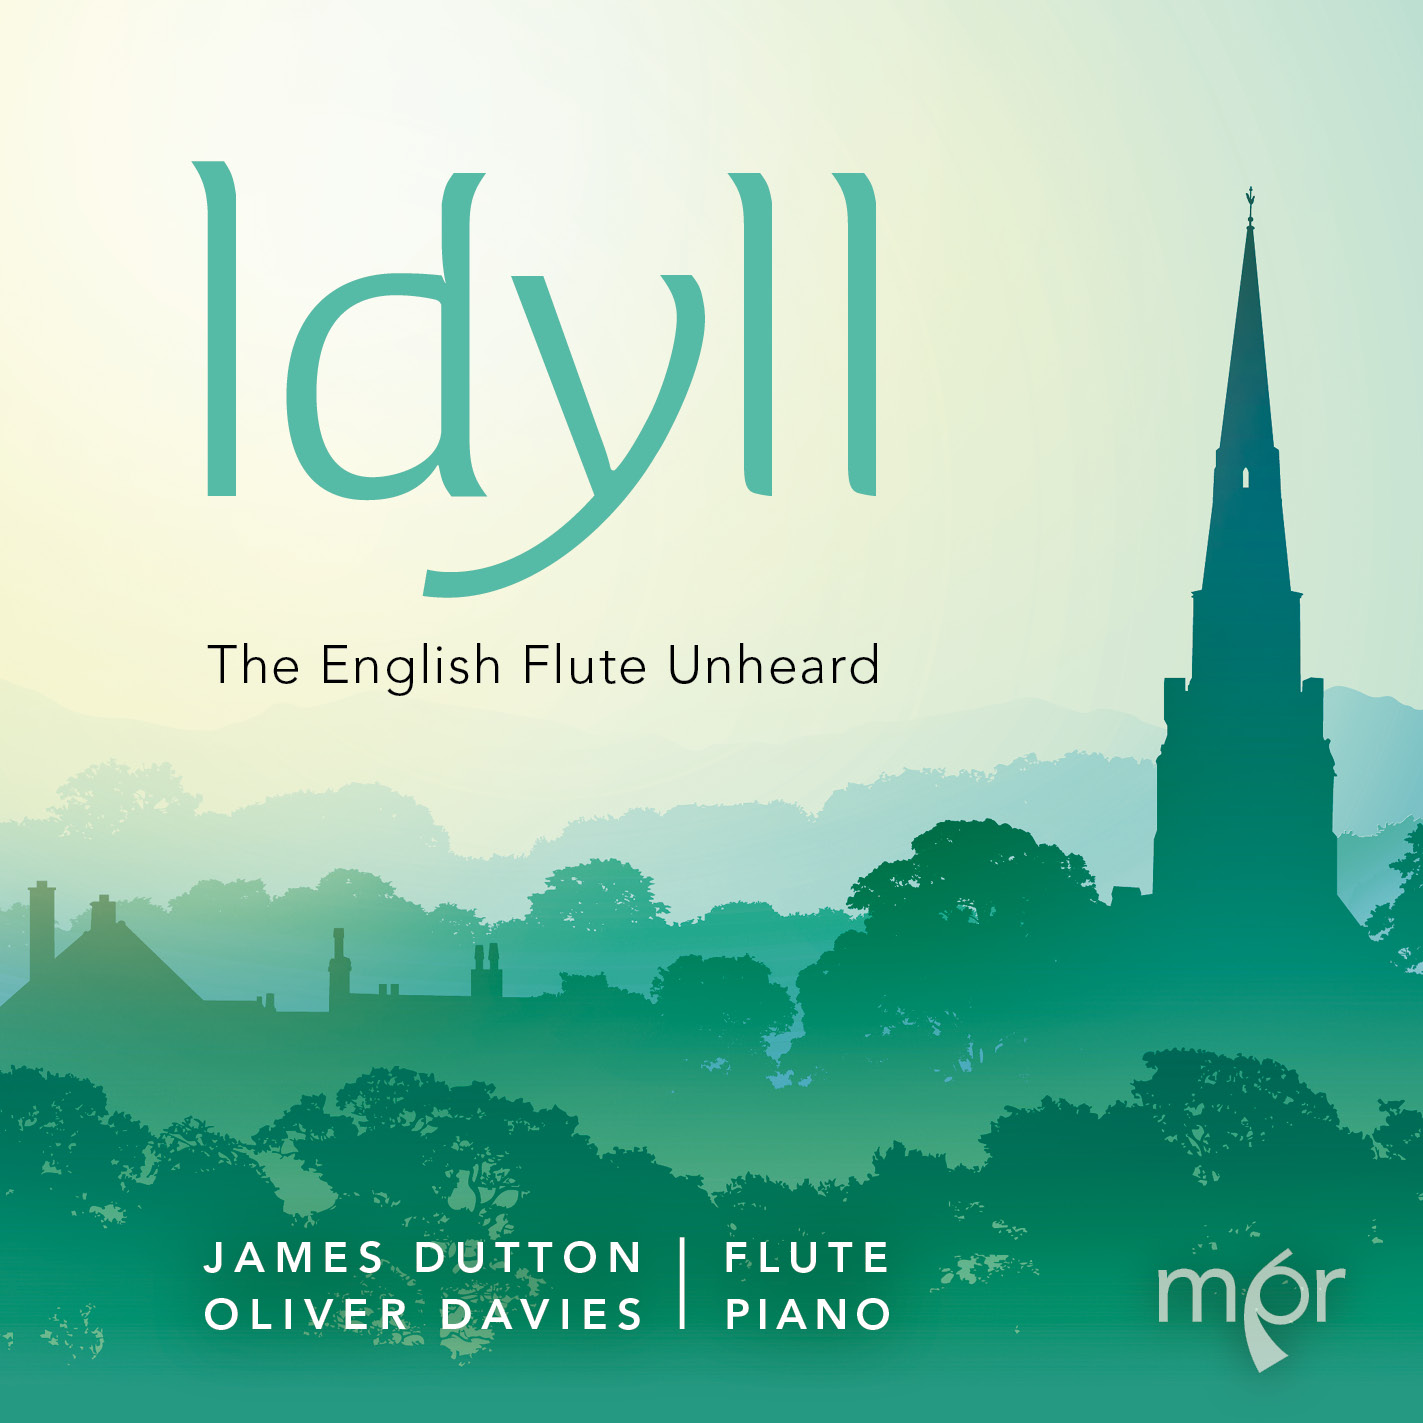 Idyll by James Dutton